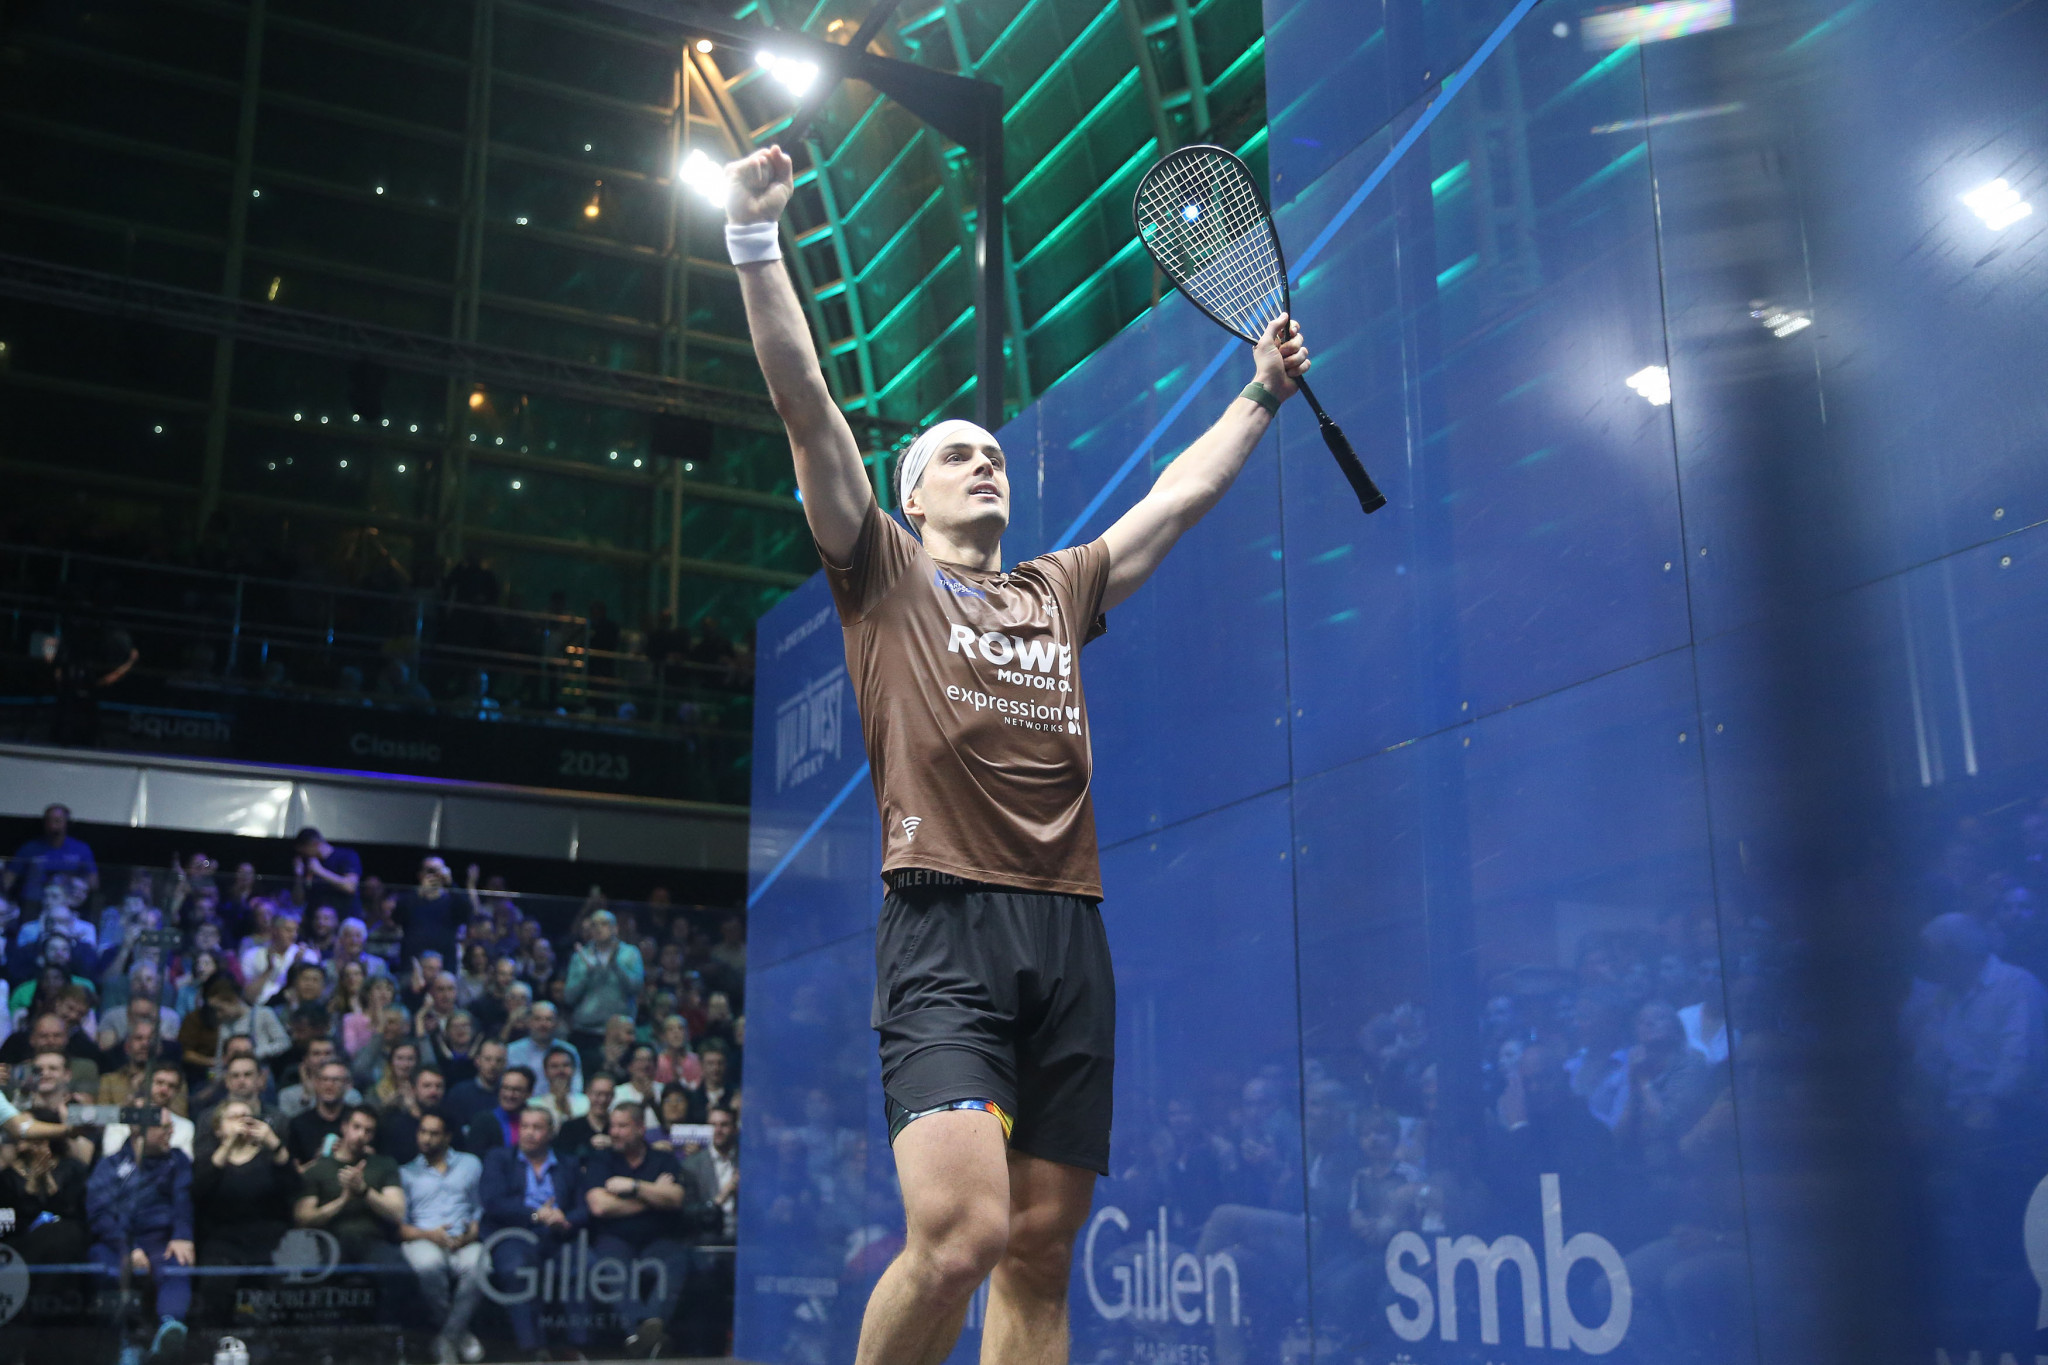 Paul Coll came from behind to win the PSA Canary Wharf Classic for a third time ©PSA World Tour